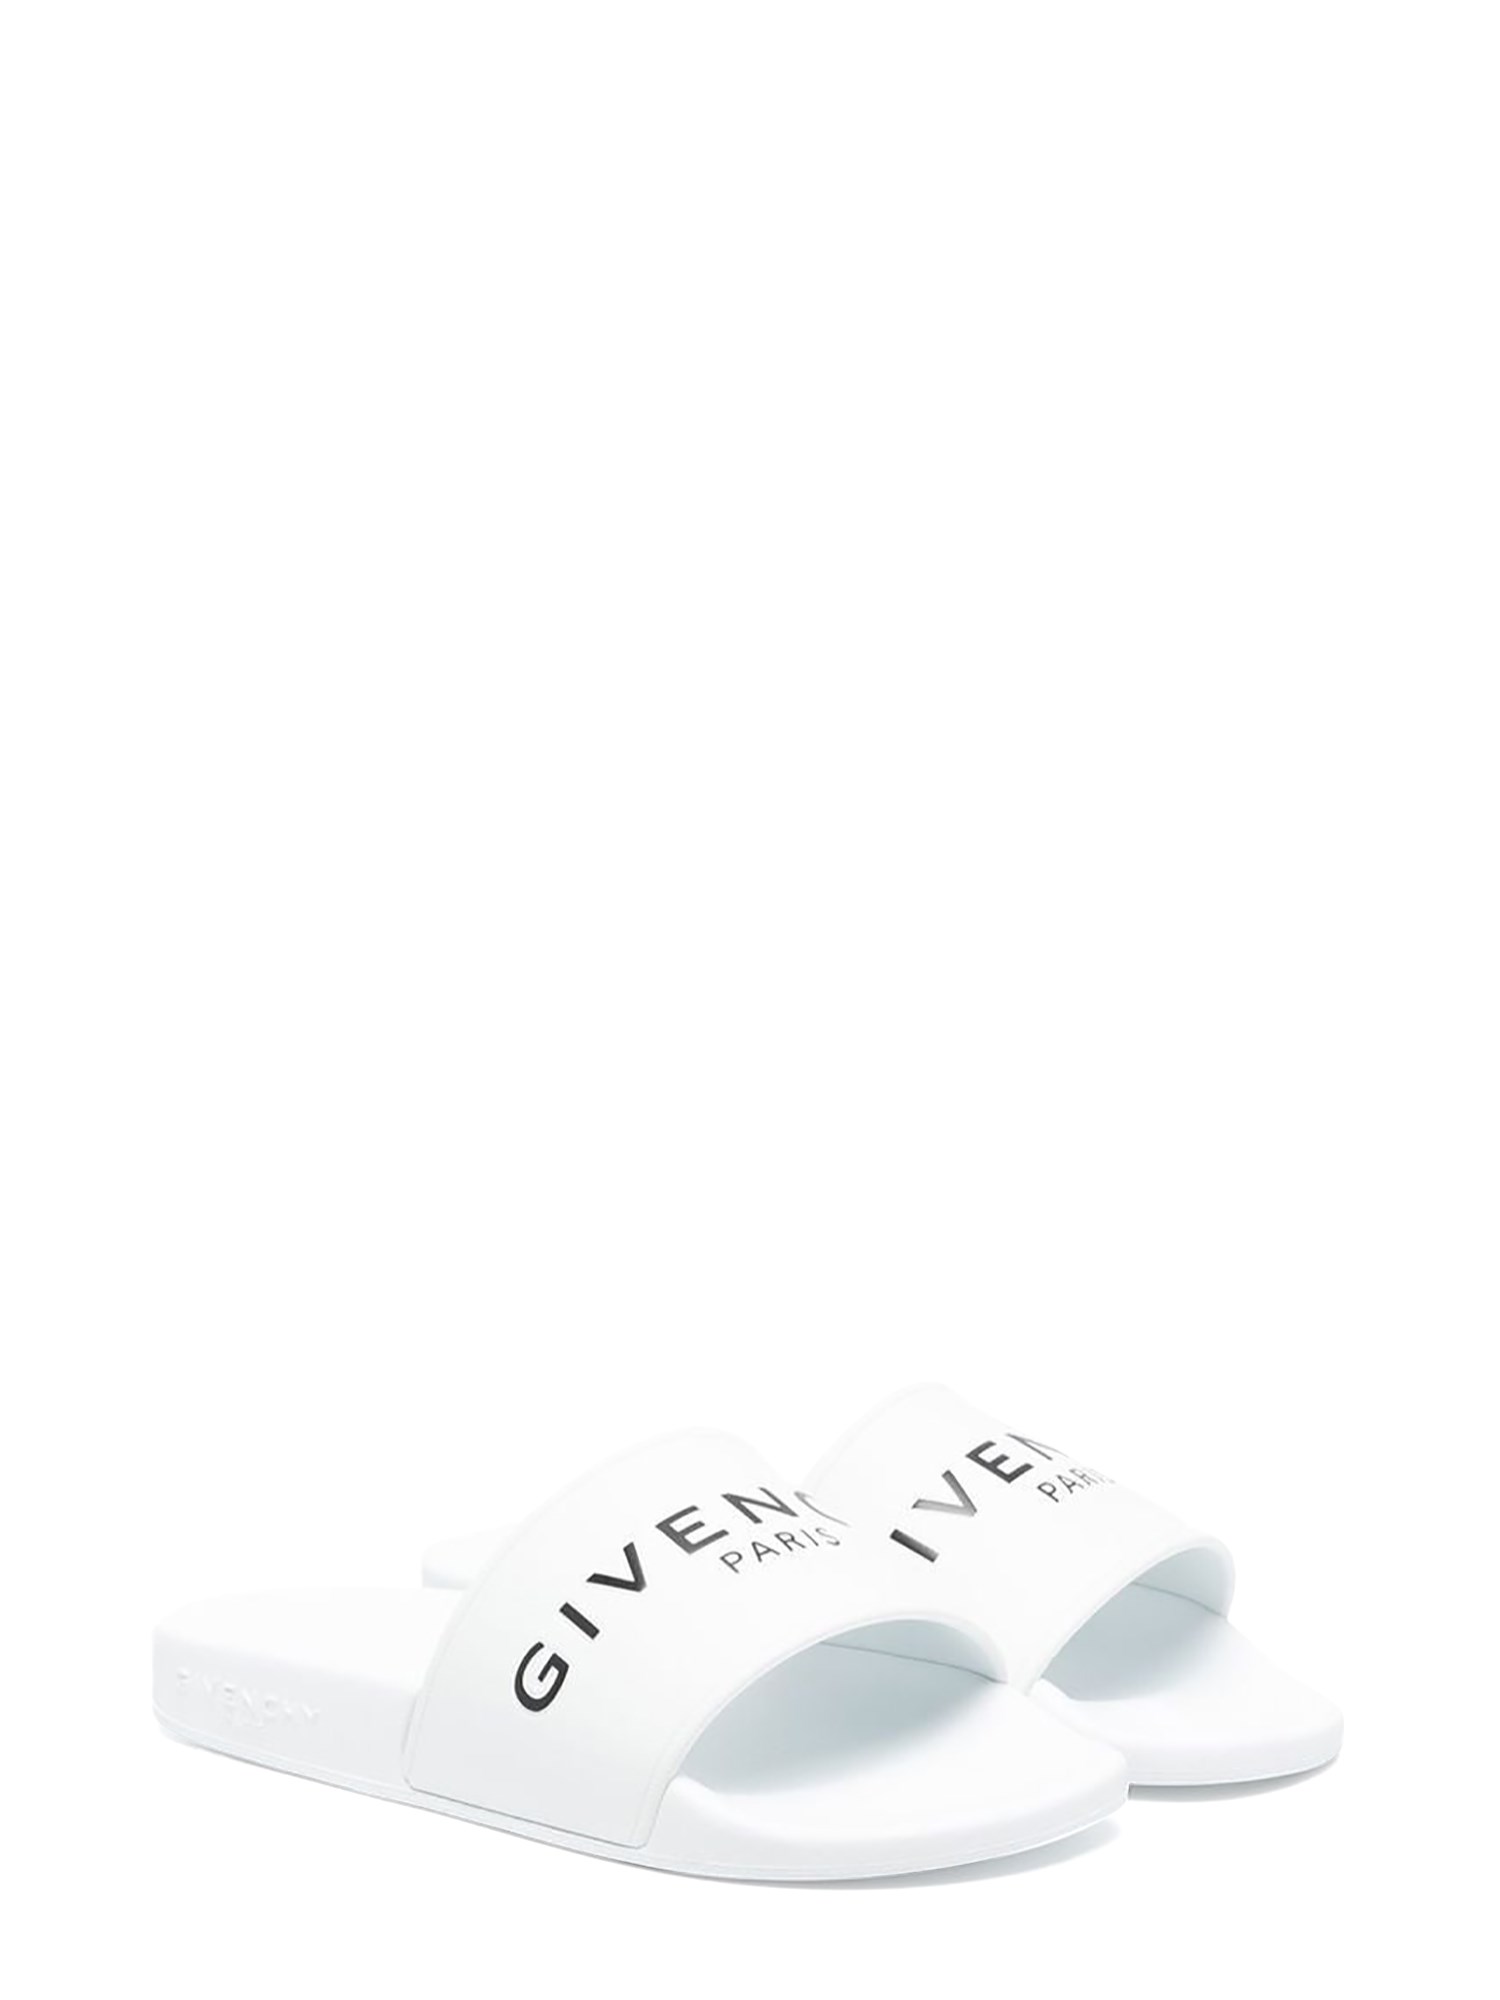 givenchy rubber logo slippers